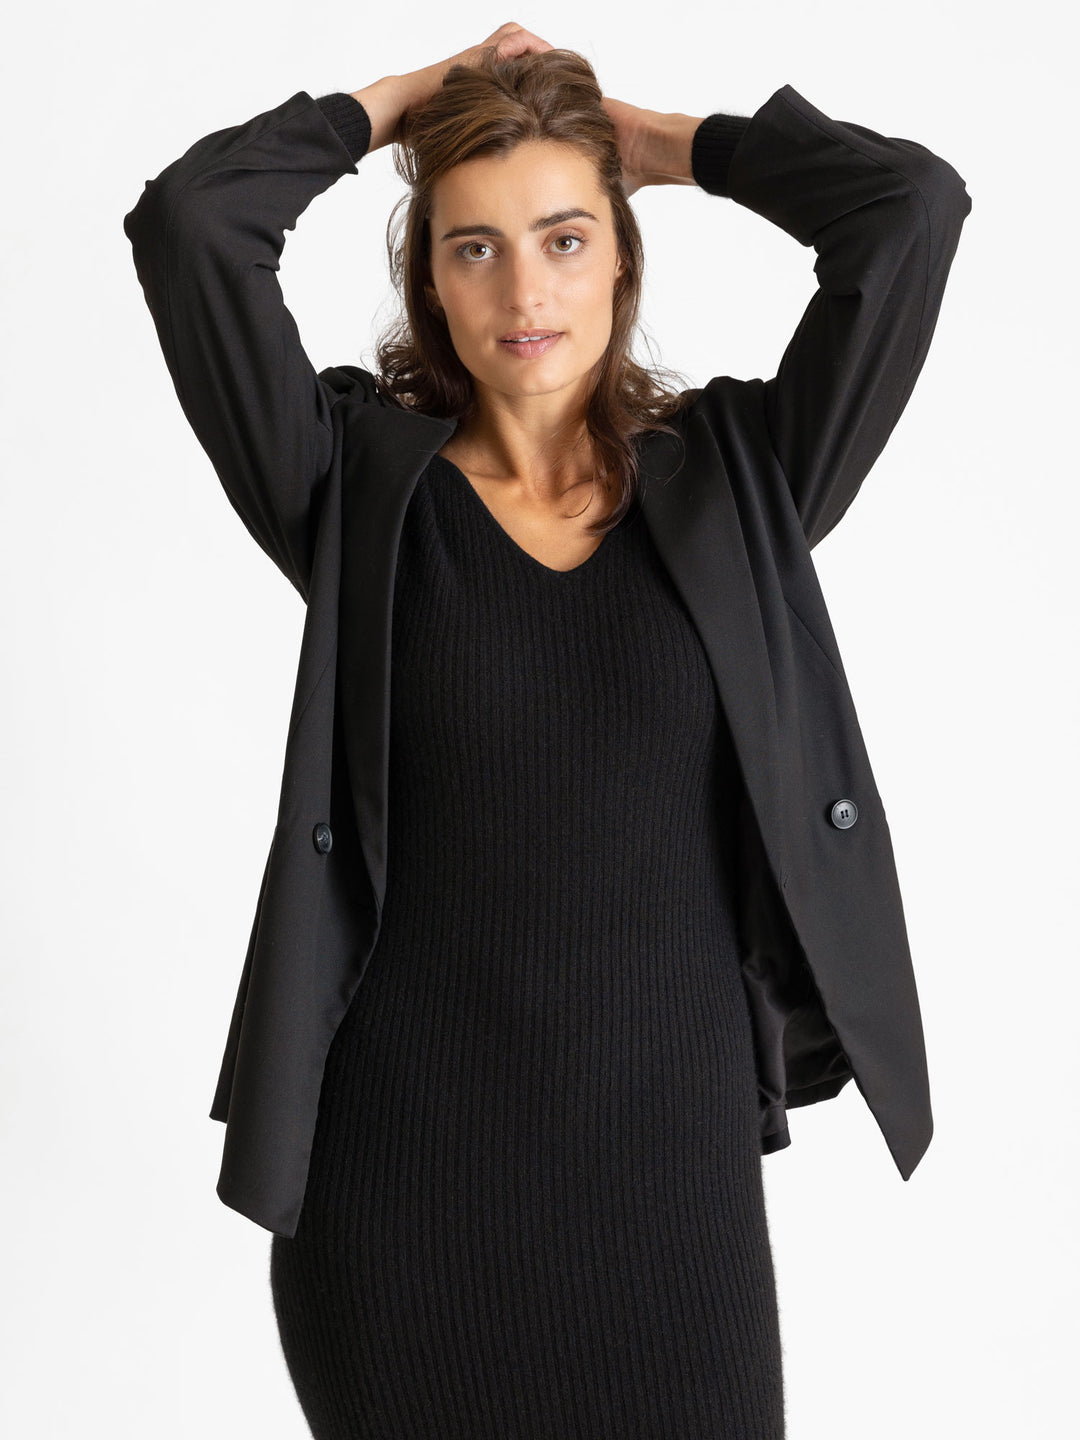 Cashmere dress "Frida", rib knitted dress in 100% cashmere from Kashmina